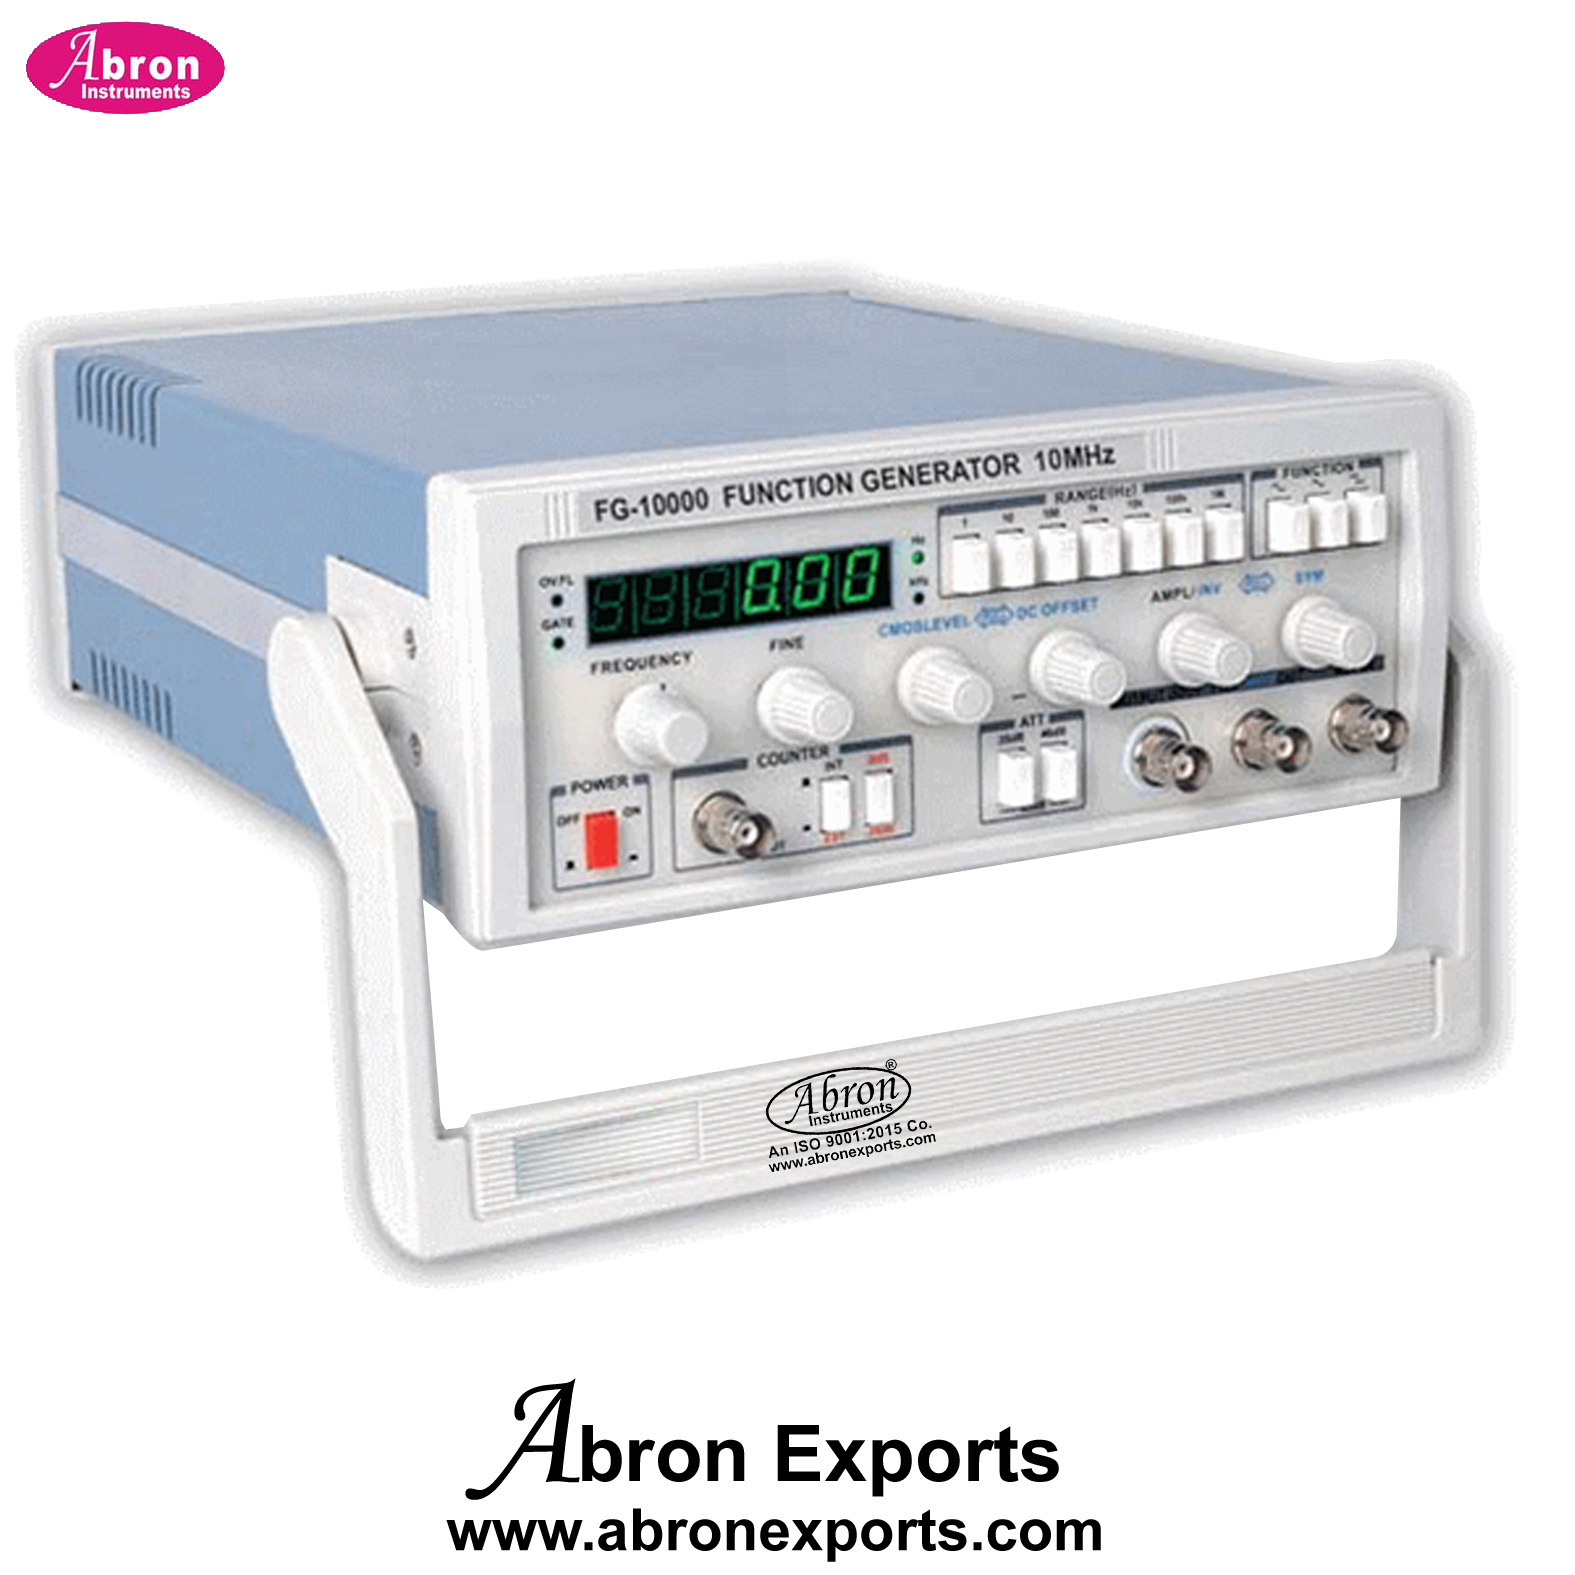 Function Generator Digital 10Hz-1MHz Sine, Triangle, Square, Â±Ramp, Â±Pulse TTL/CMOS and OUTPUT synchronous output With digital frequency counter 1Hz-300MHz AE-1353-A1D